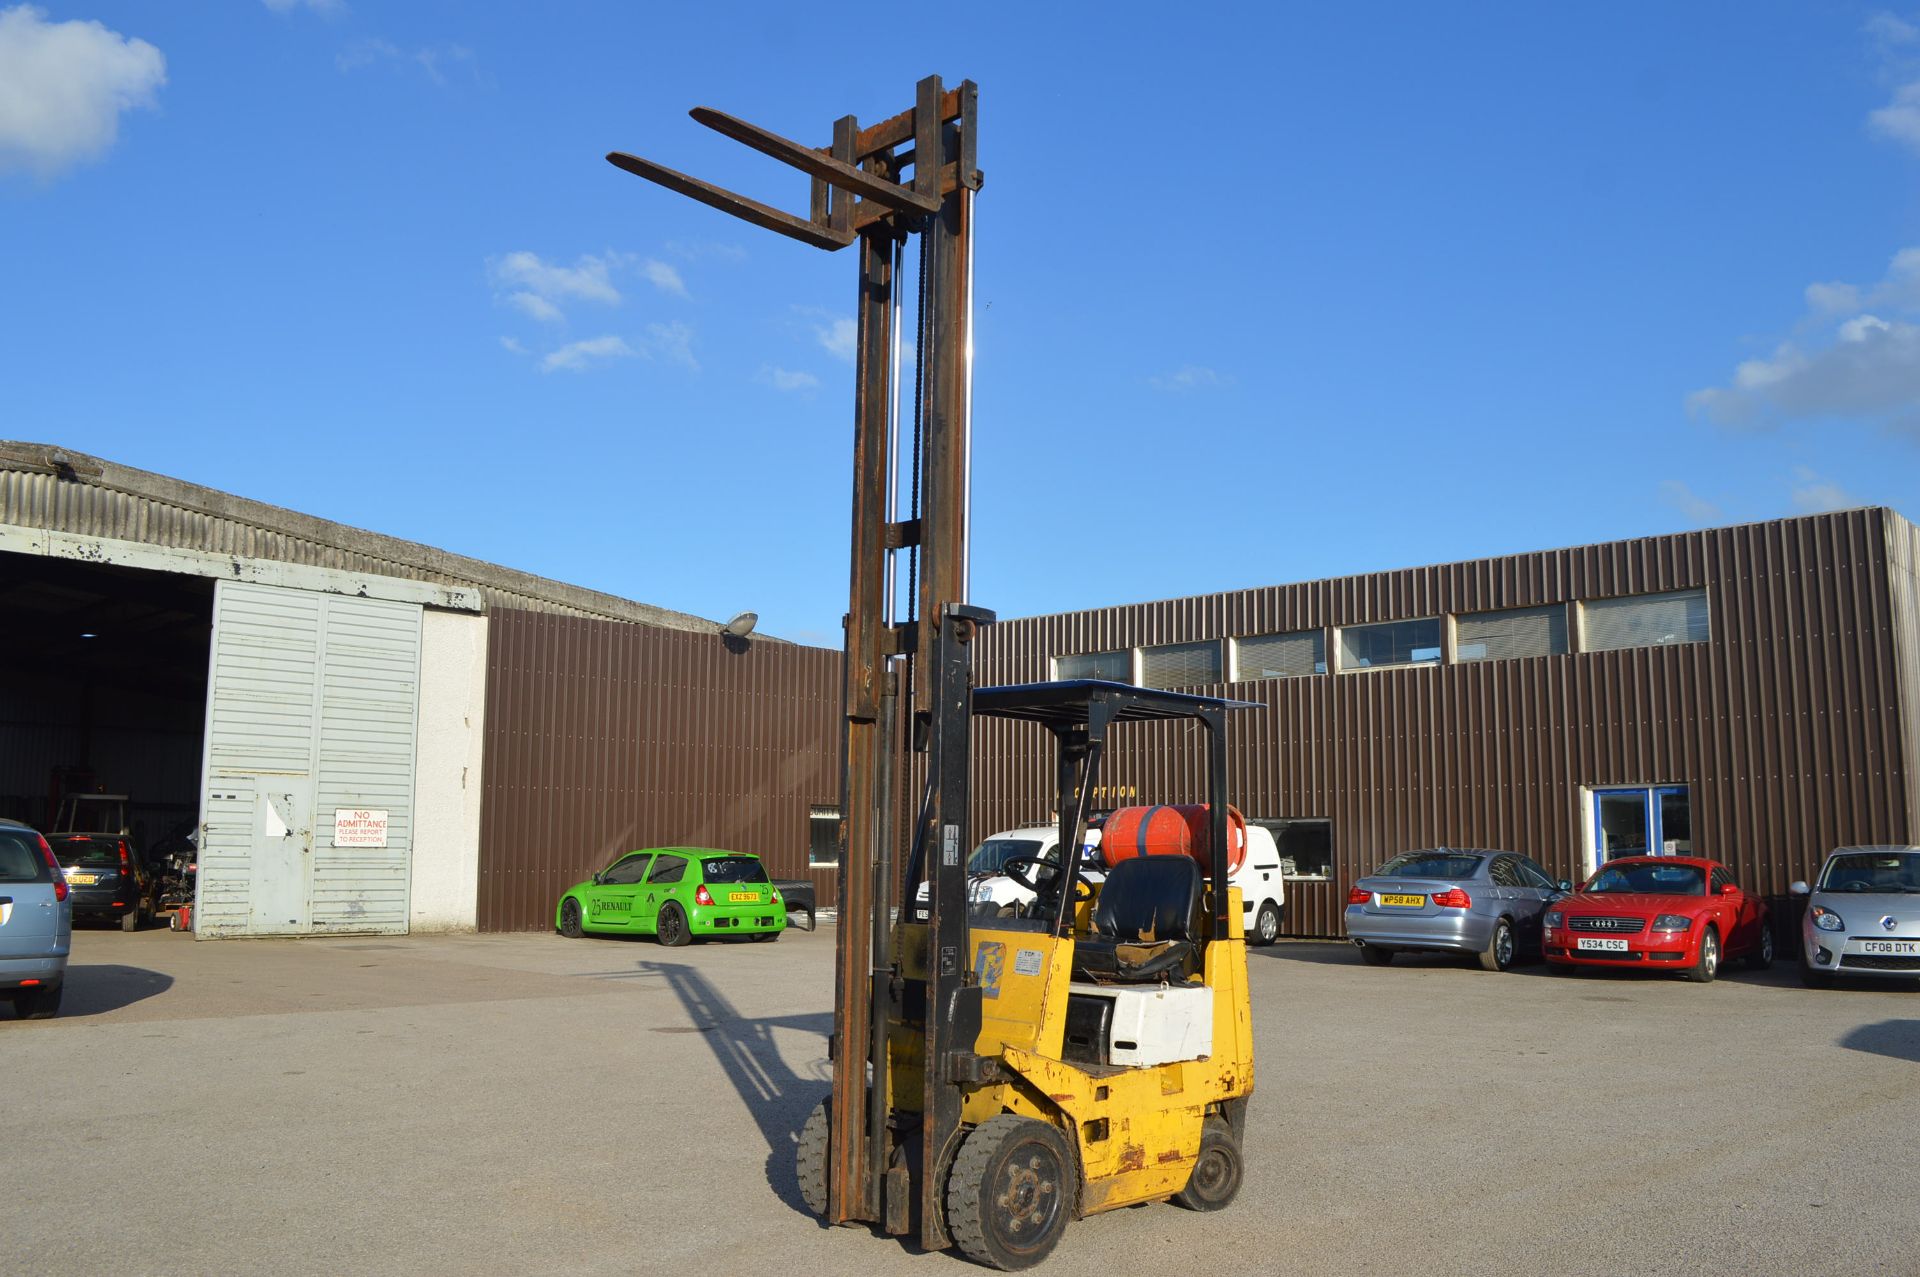 TCM 1.75T LPG FORKLIFT - GAS BOTTLE NOT INCLUDED   BRAKES GOOD RATED CAPACITY: 1600KG MAX FORK - Image 12 of 14